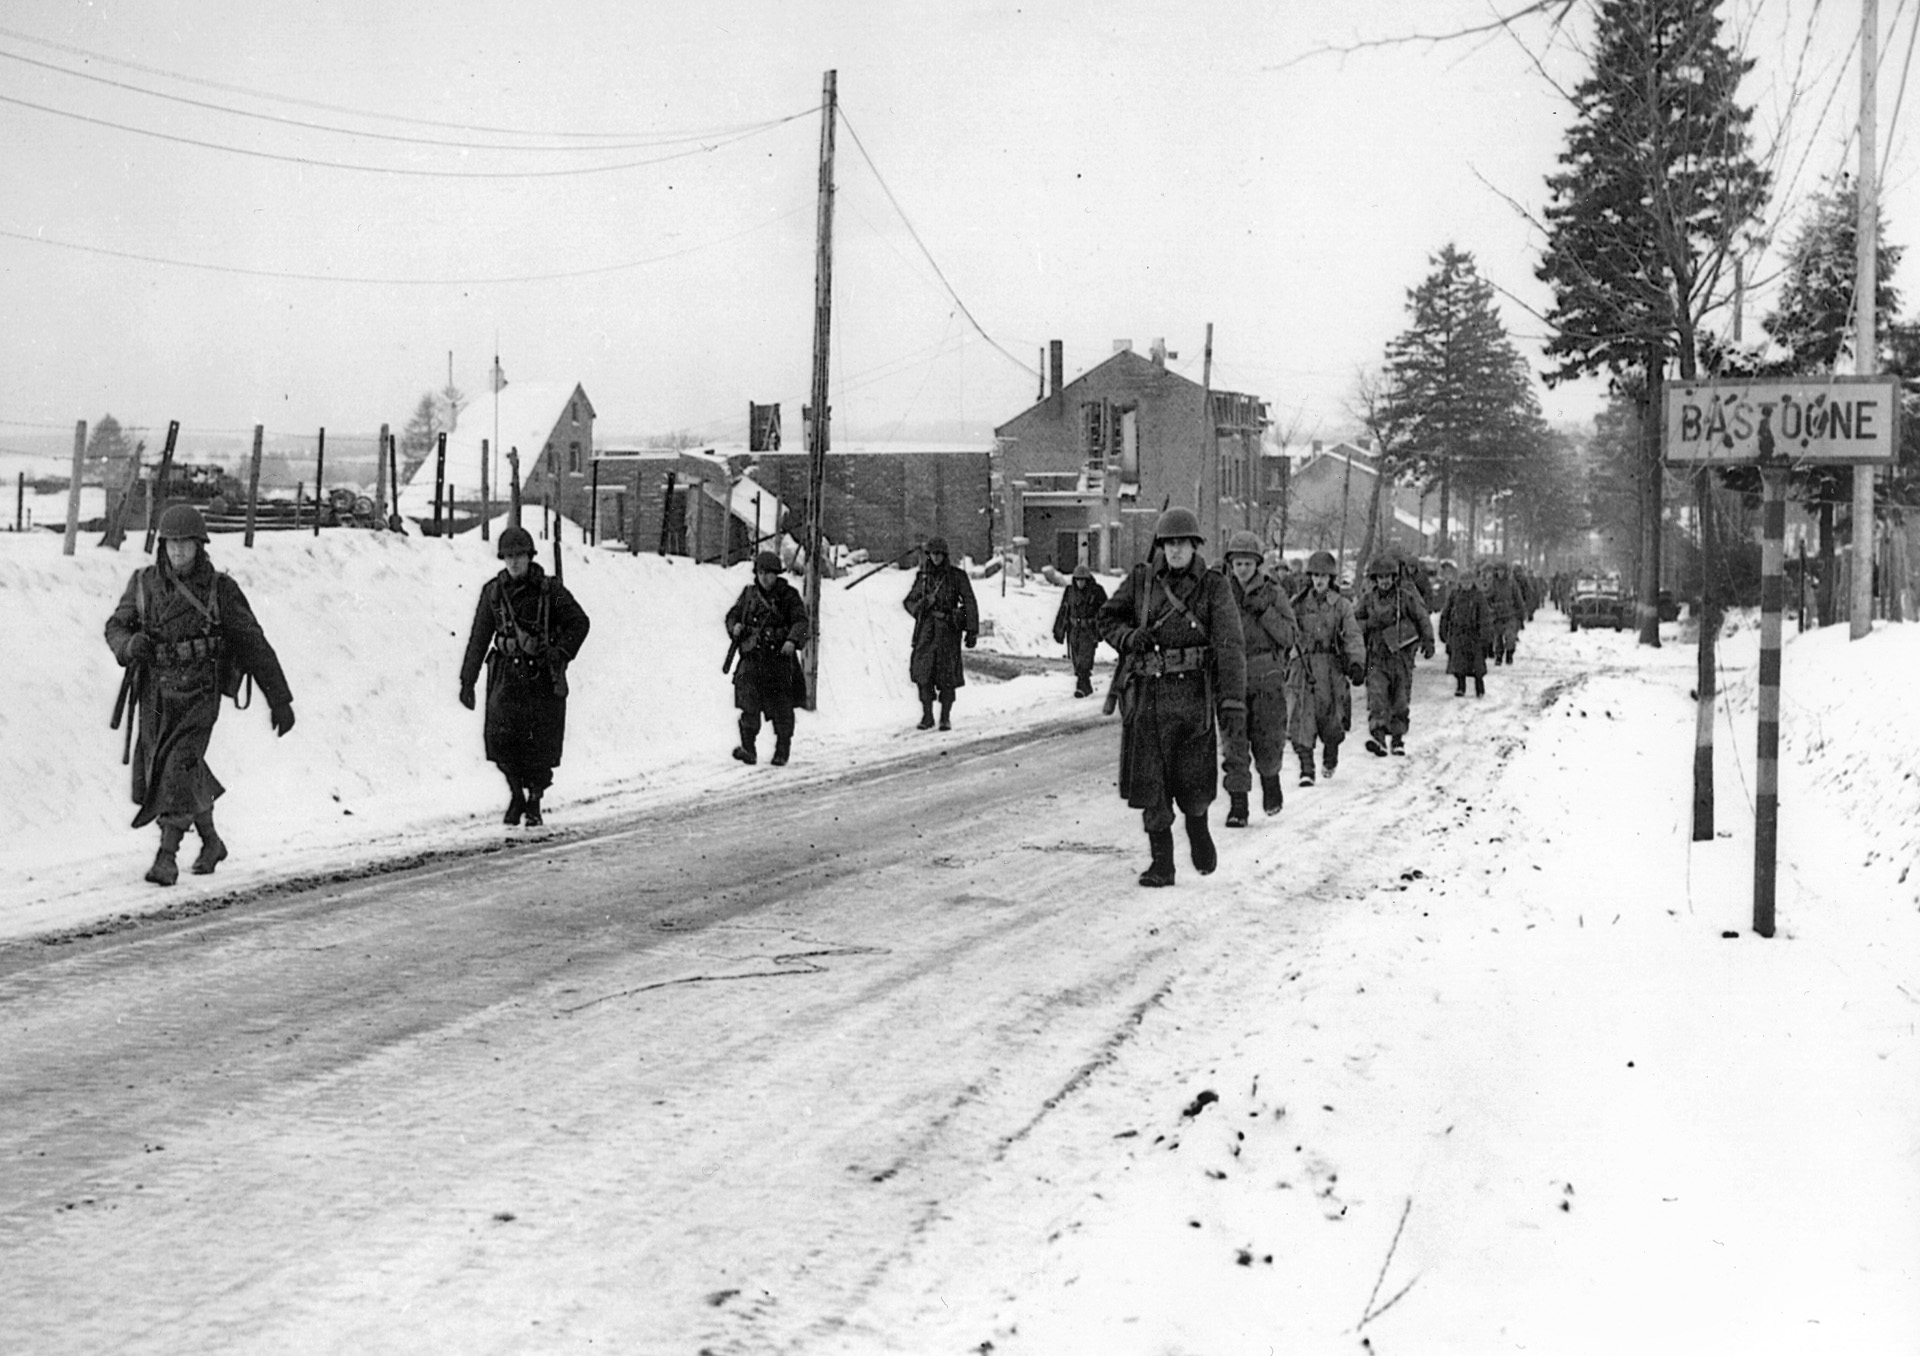 Paratroopers of the 101st Airborne Division march out of Bastogne after successfully defending  it from German attack. Don Malarkey lost numerous friends in the woods around Bastogne.  “Skip” Muck’s death haunted him for the rest of his life.